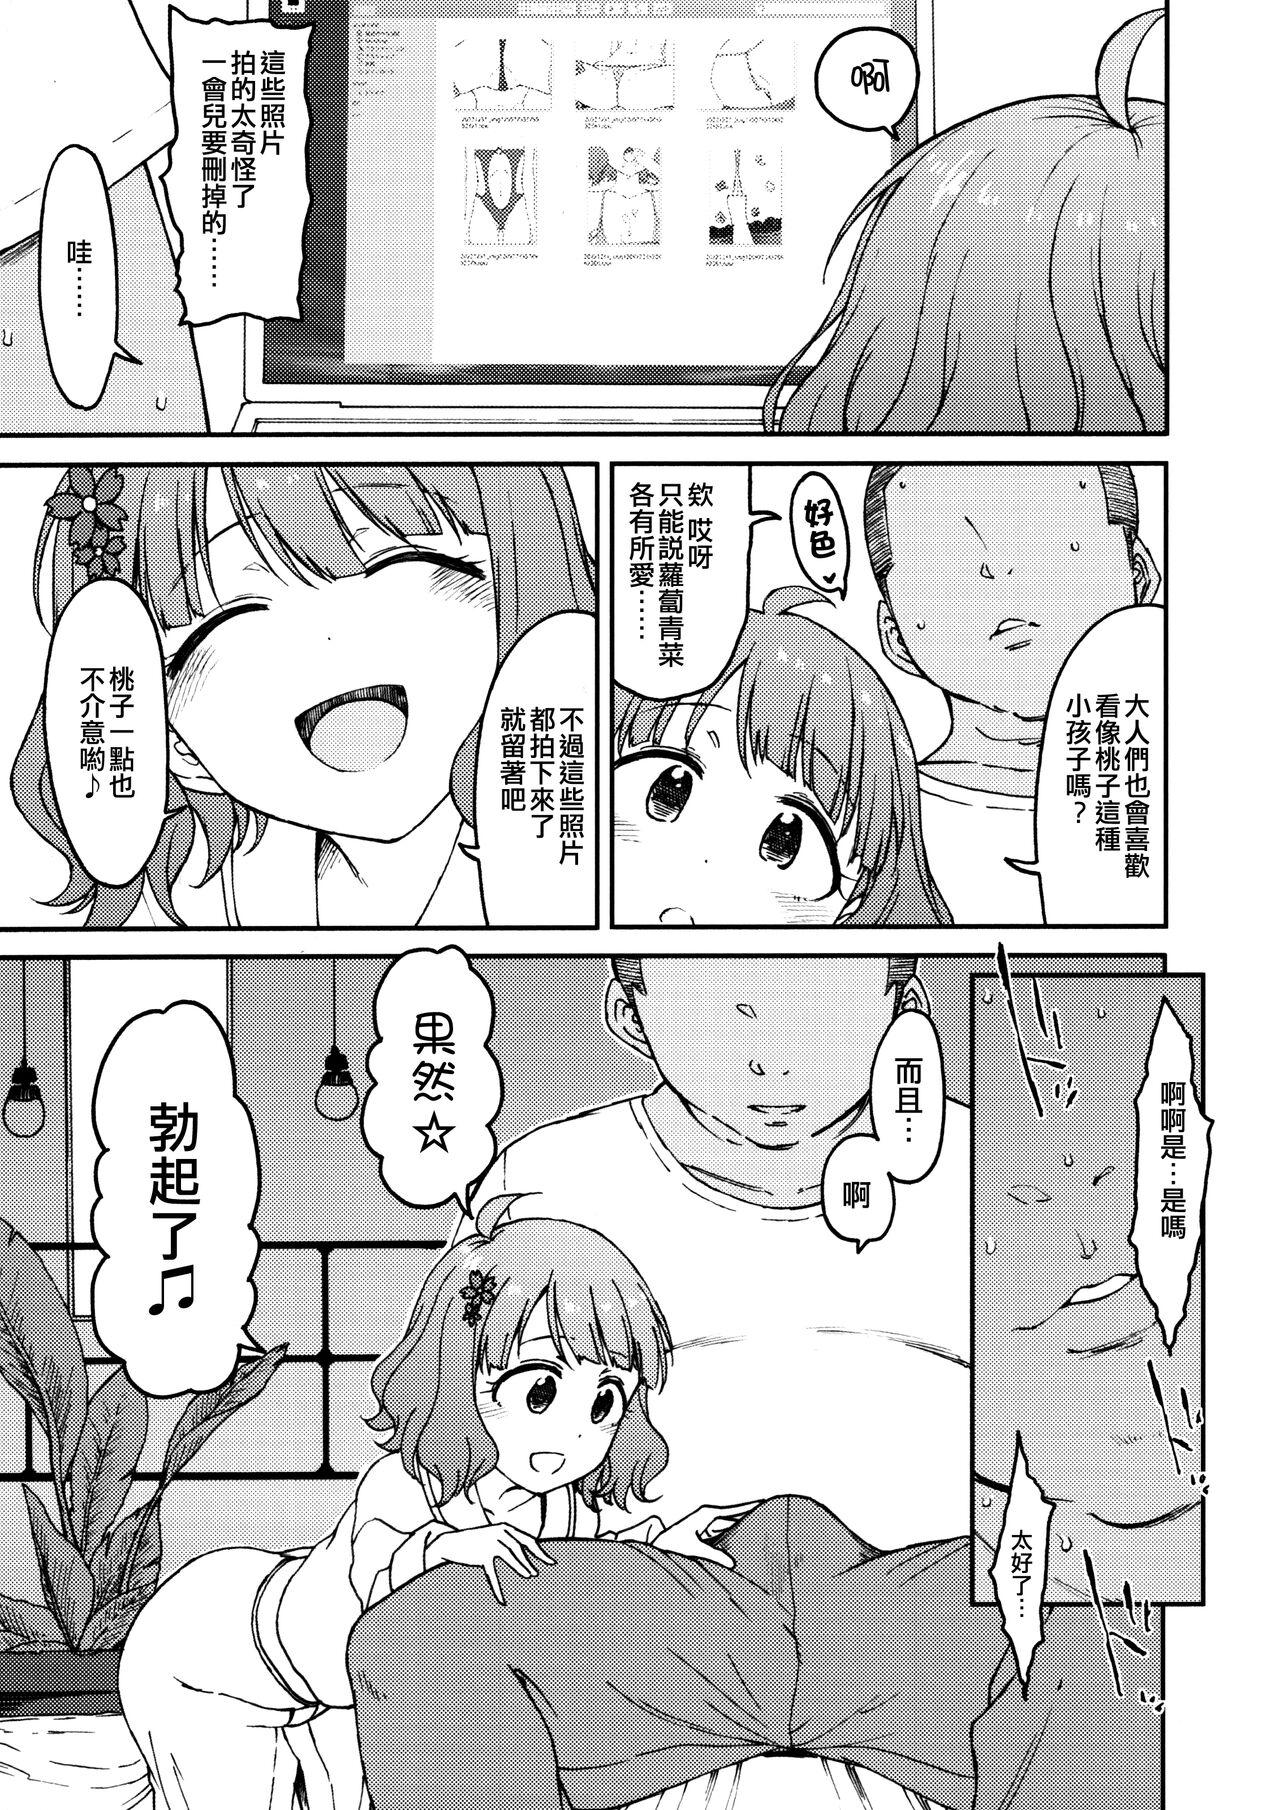 Fun Candy Wrapper - The idolmaster Panty - Page 12